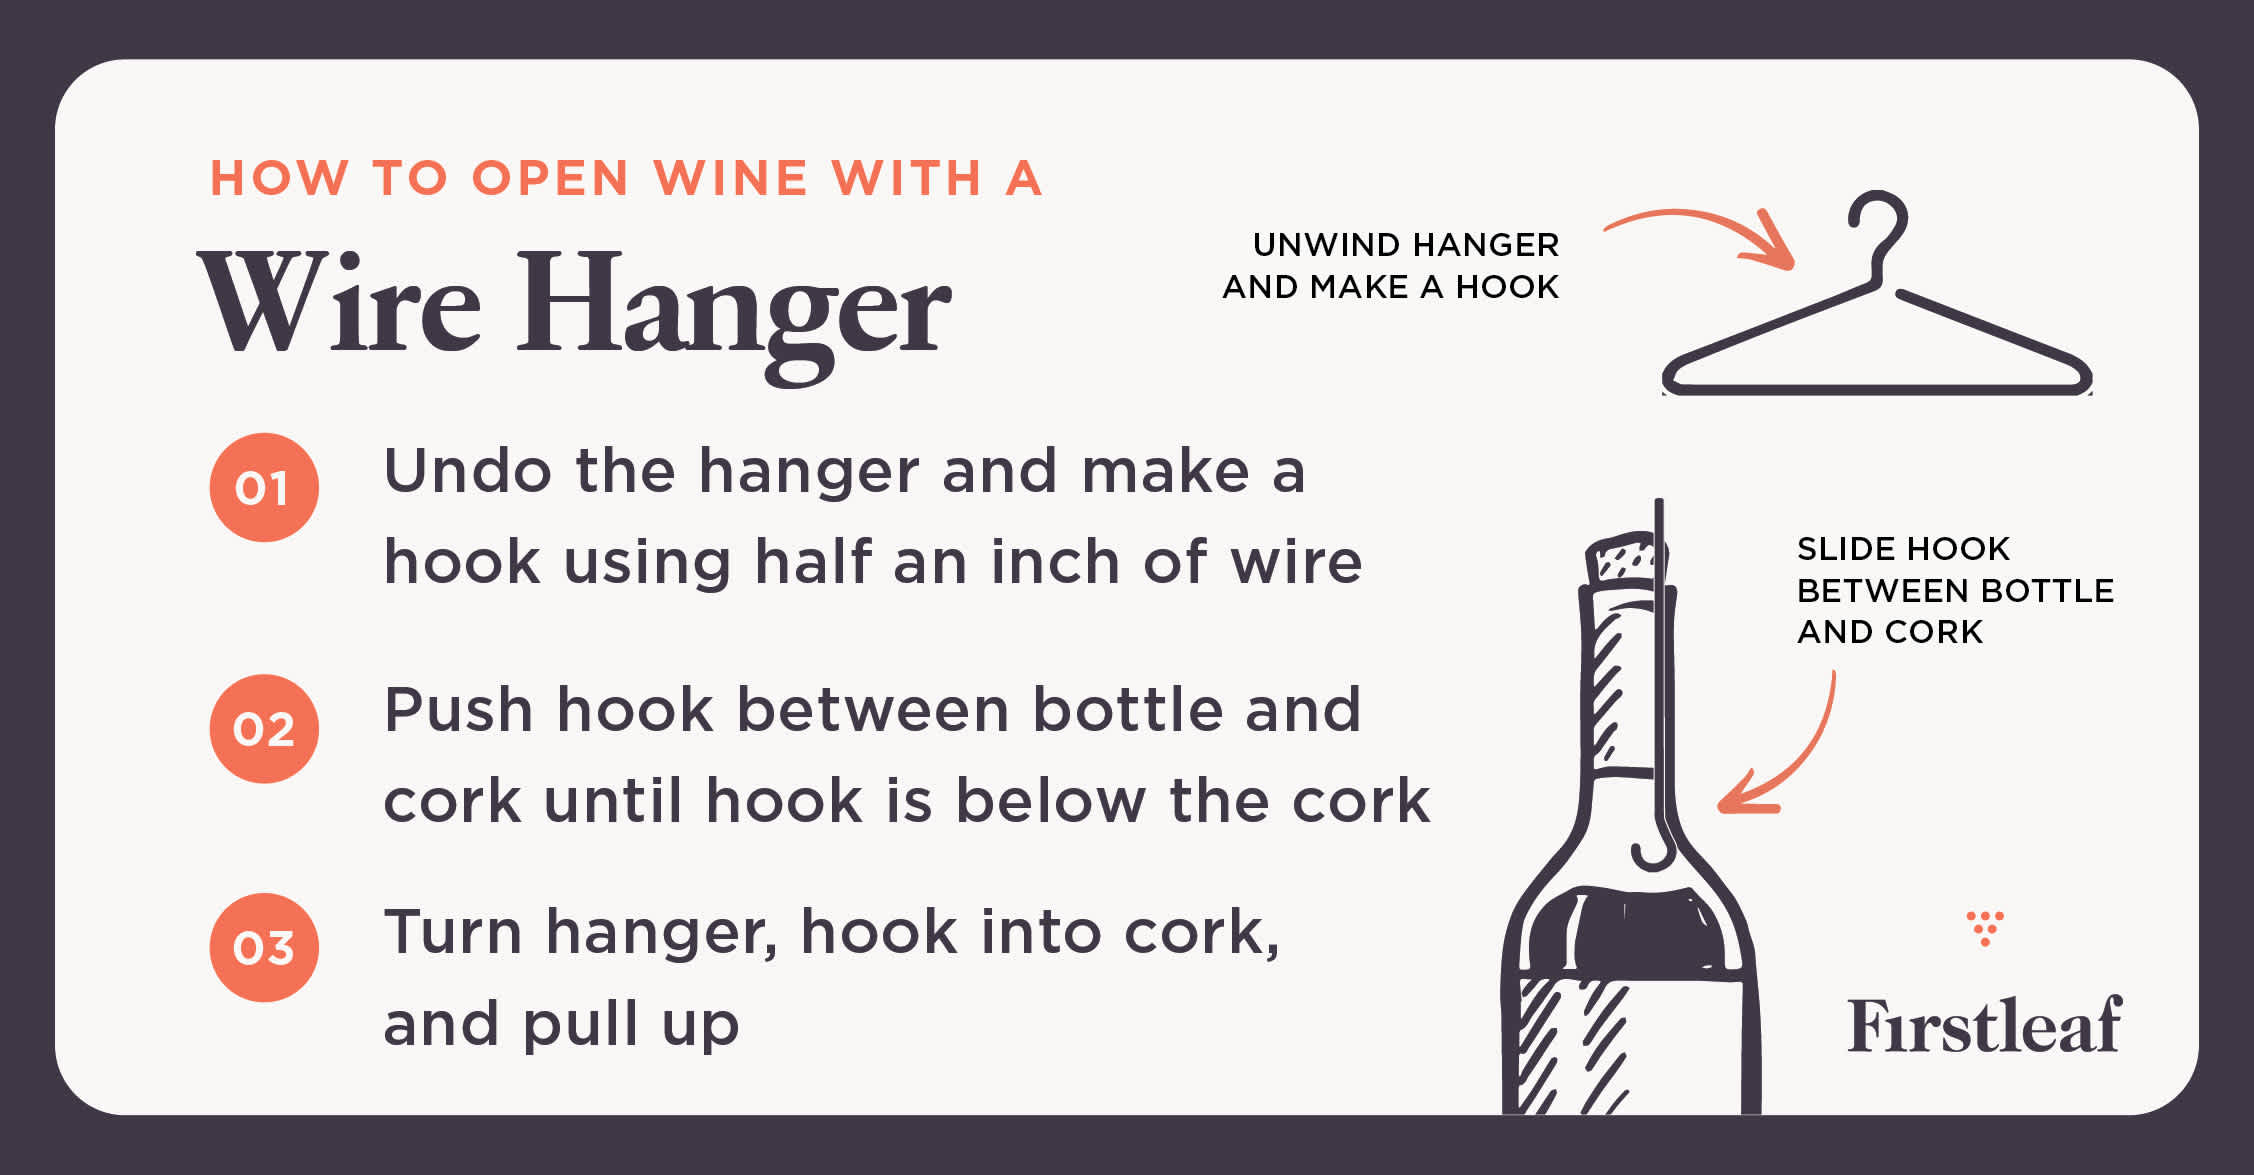 How to Open Wine with Wire Hanger